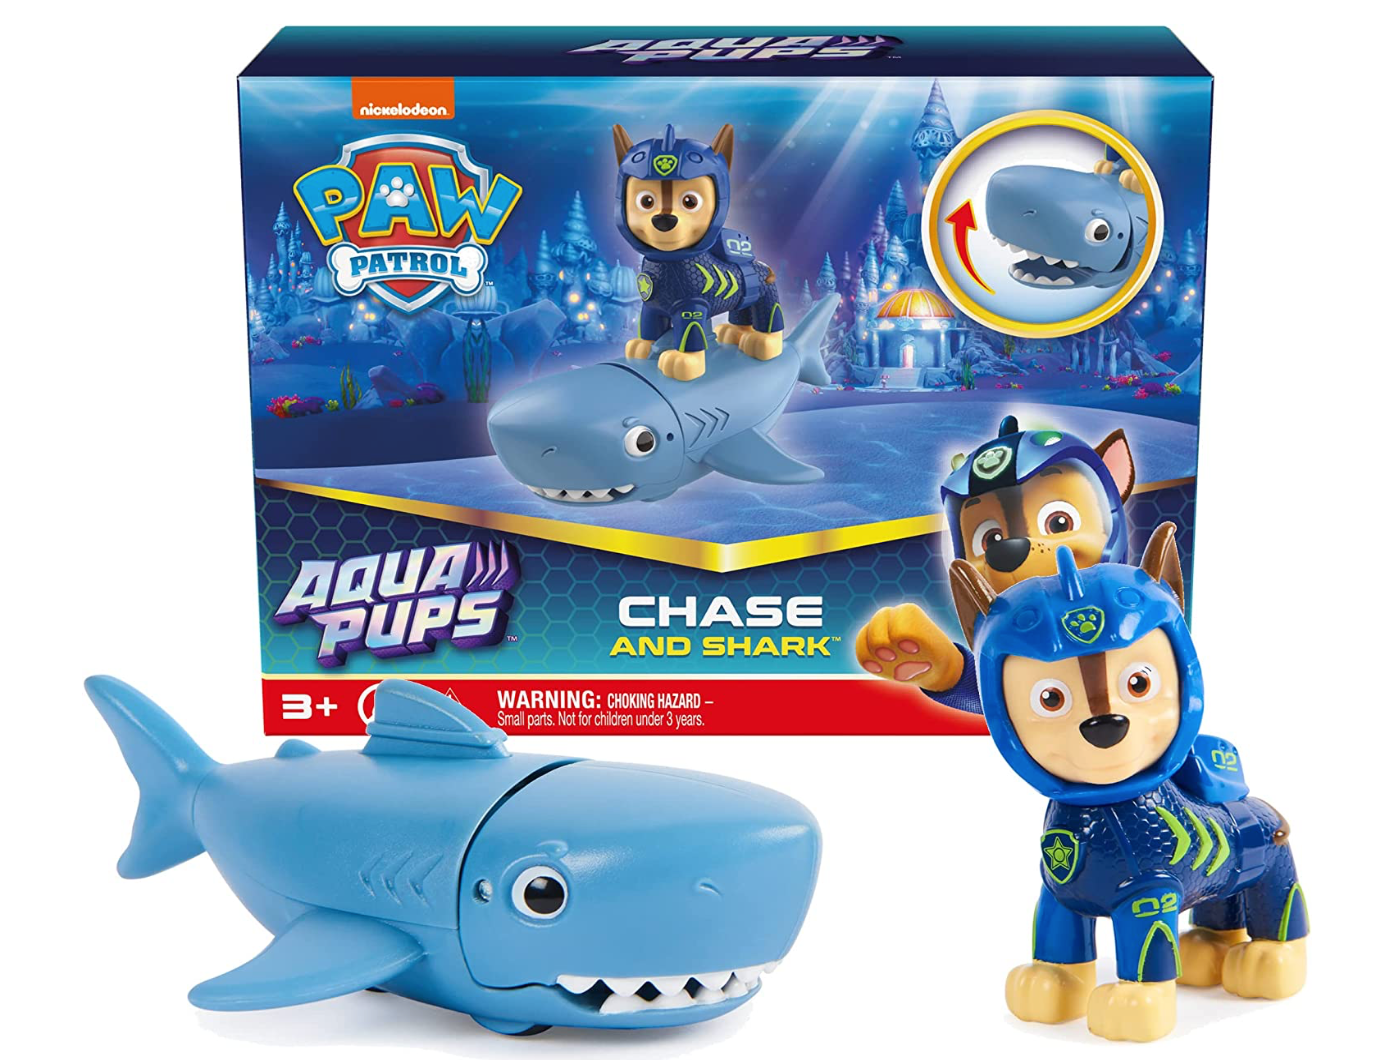 PAW Patrol Aqua Pups Chase and Shark Action Figure Set Kid Toy New With Box